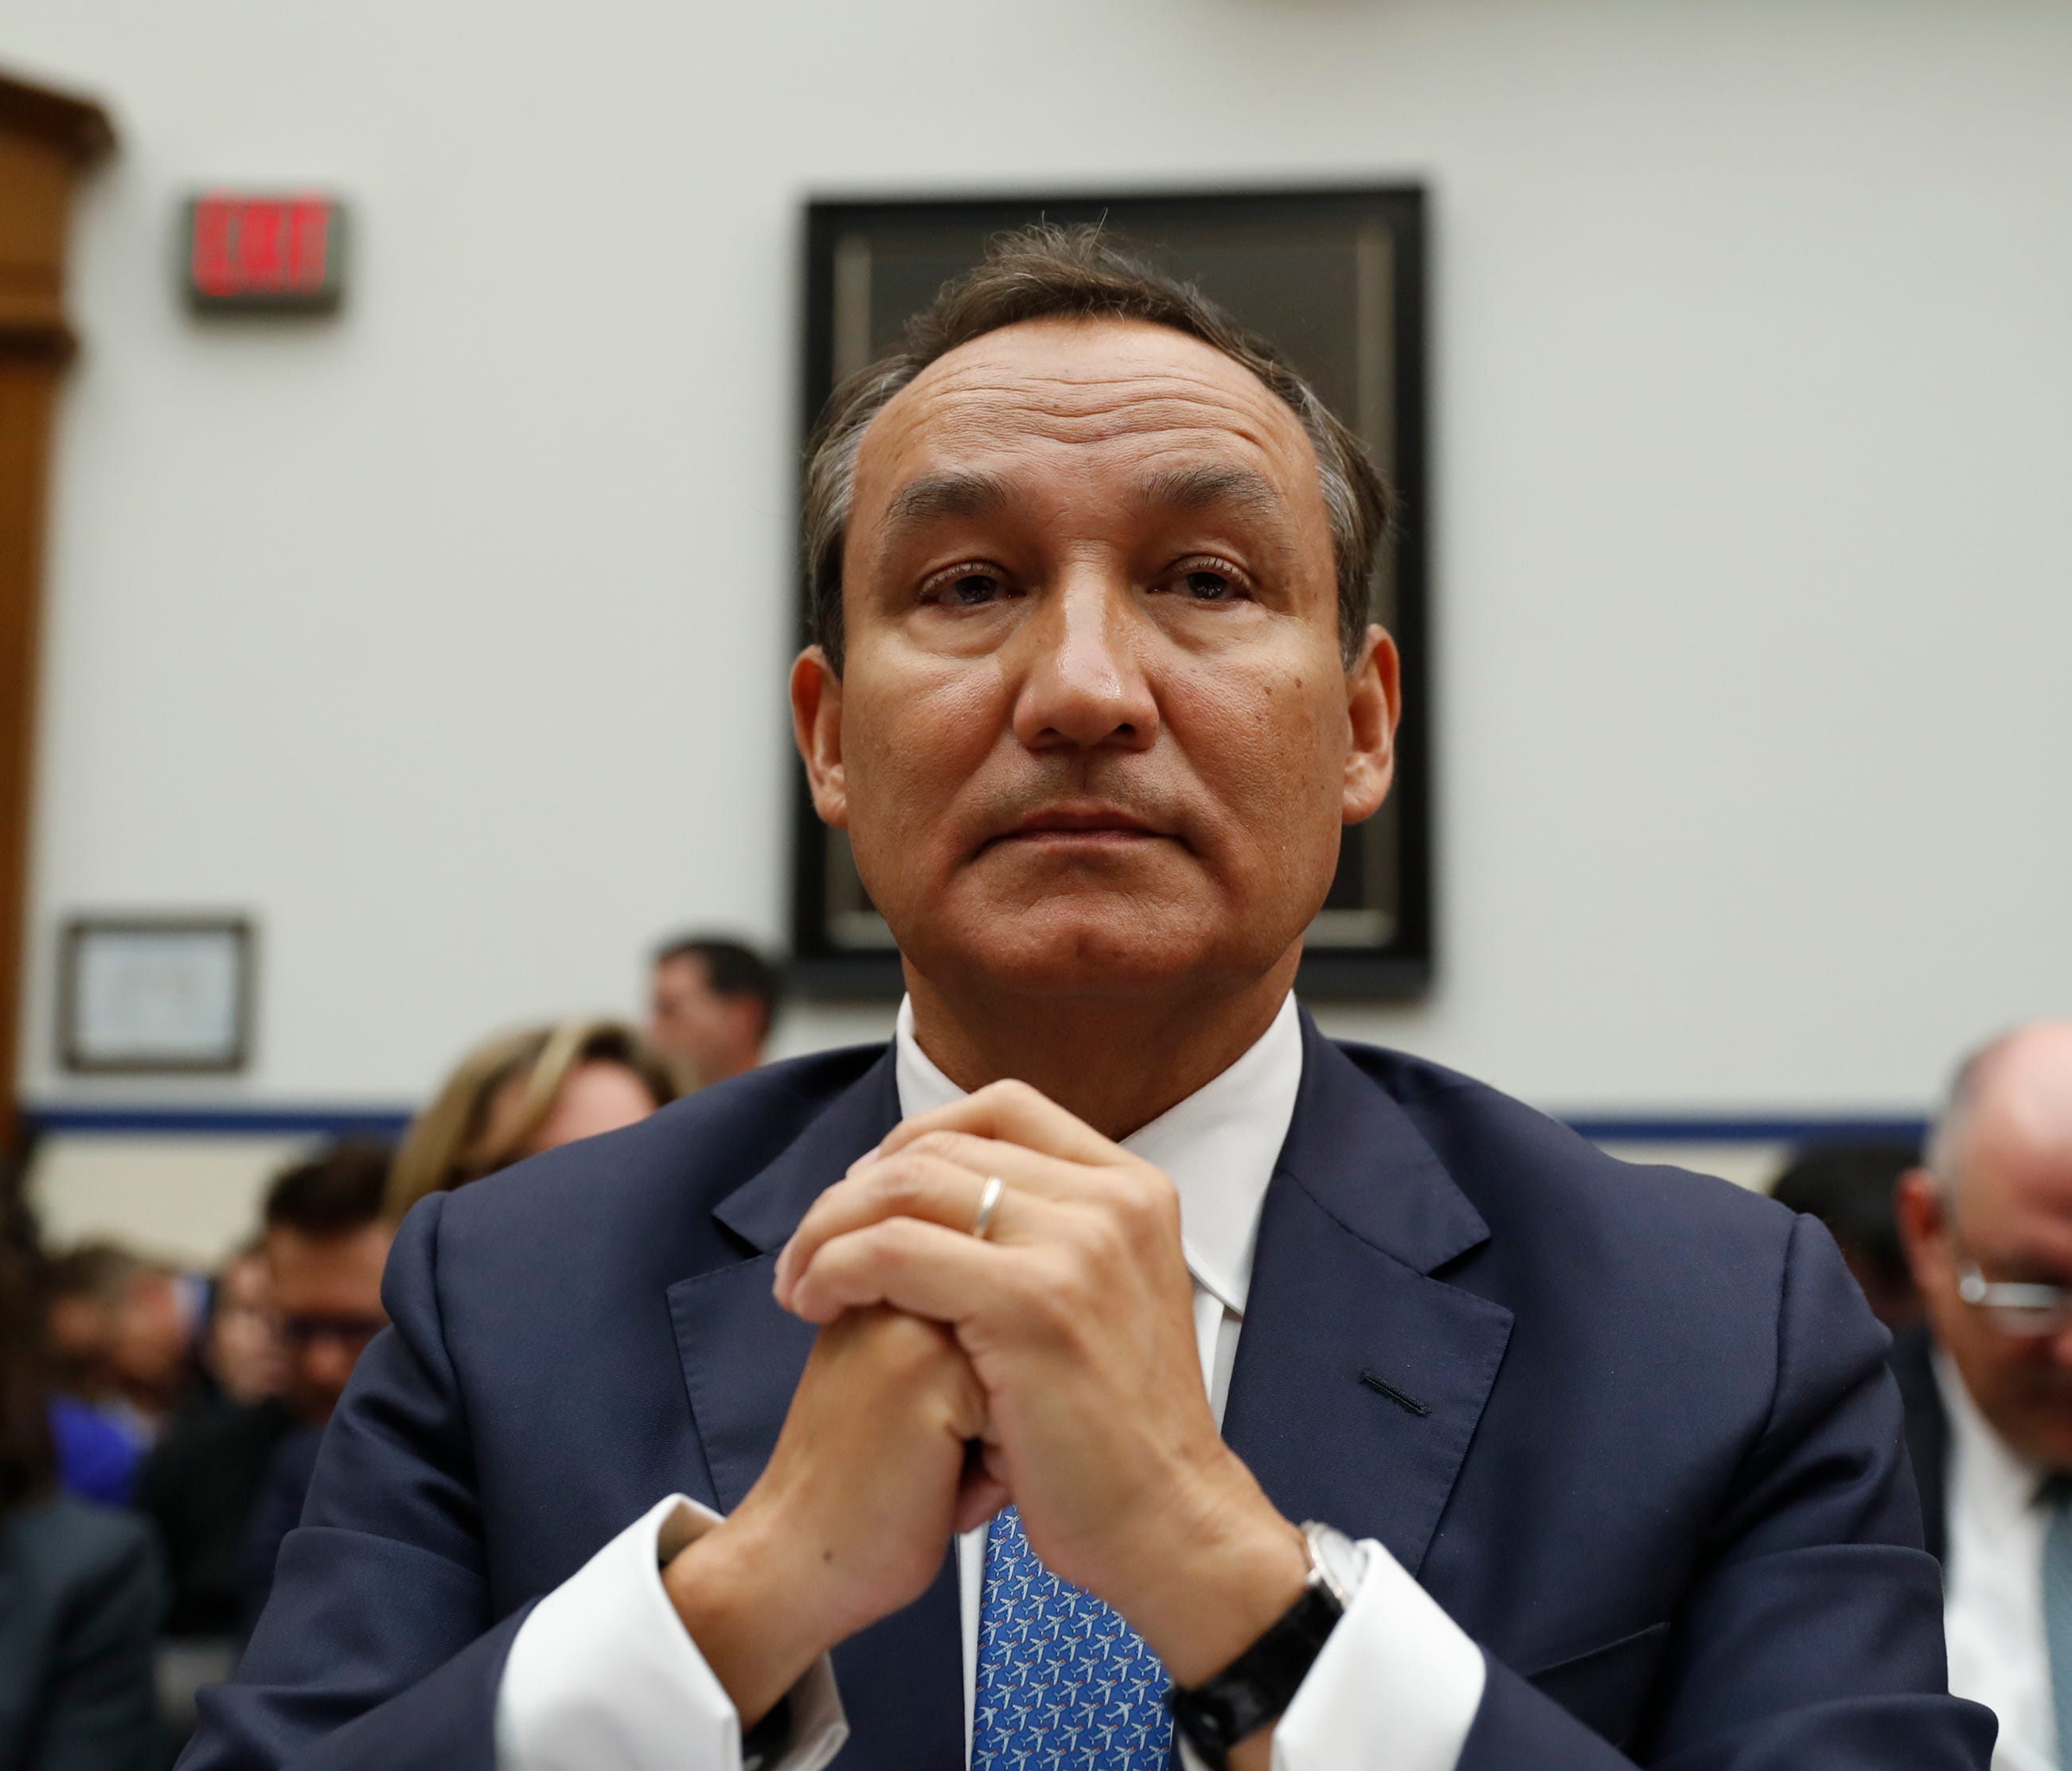 United Airlines CEO Oscar Munoz prepares to testify before a House Transportation Committee oversight hearing on May 2, 2017, on Capitol Hill in Washington.